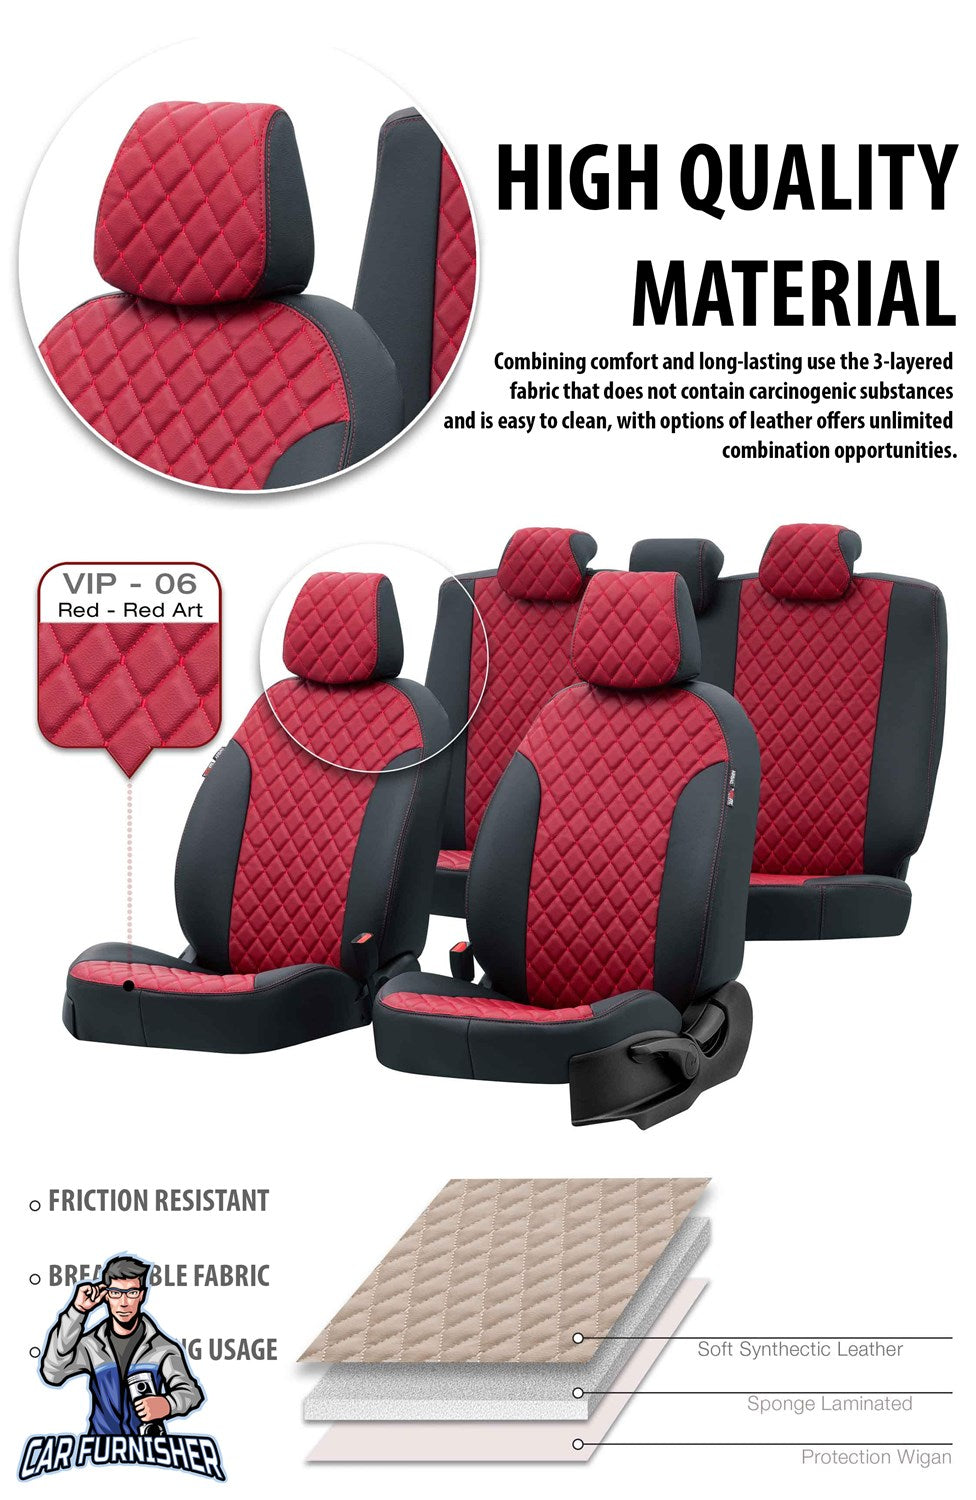 Renault Kangoo Seat Covers Madrid Leather Design Smoked Leather